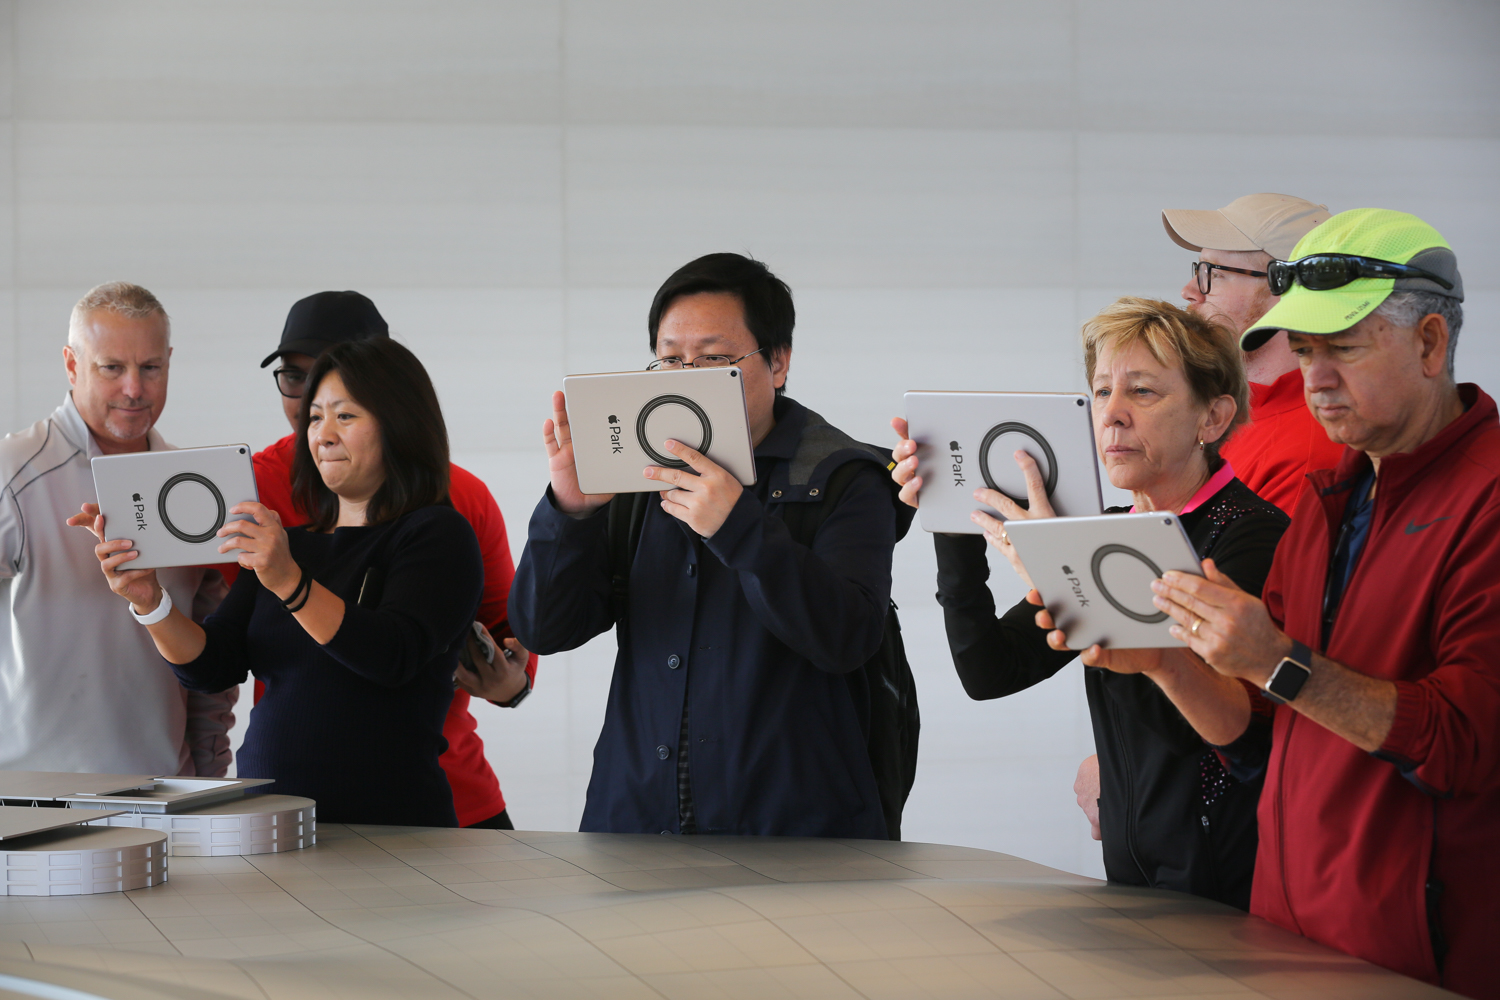  Visitors use iPads to experience an augmented reality tour of Apple's new spaceship campus at the opening of the Apple Park Visitor Center in Cupertino, California 